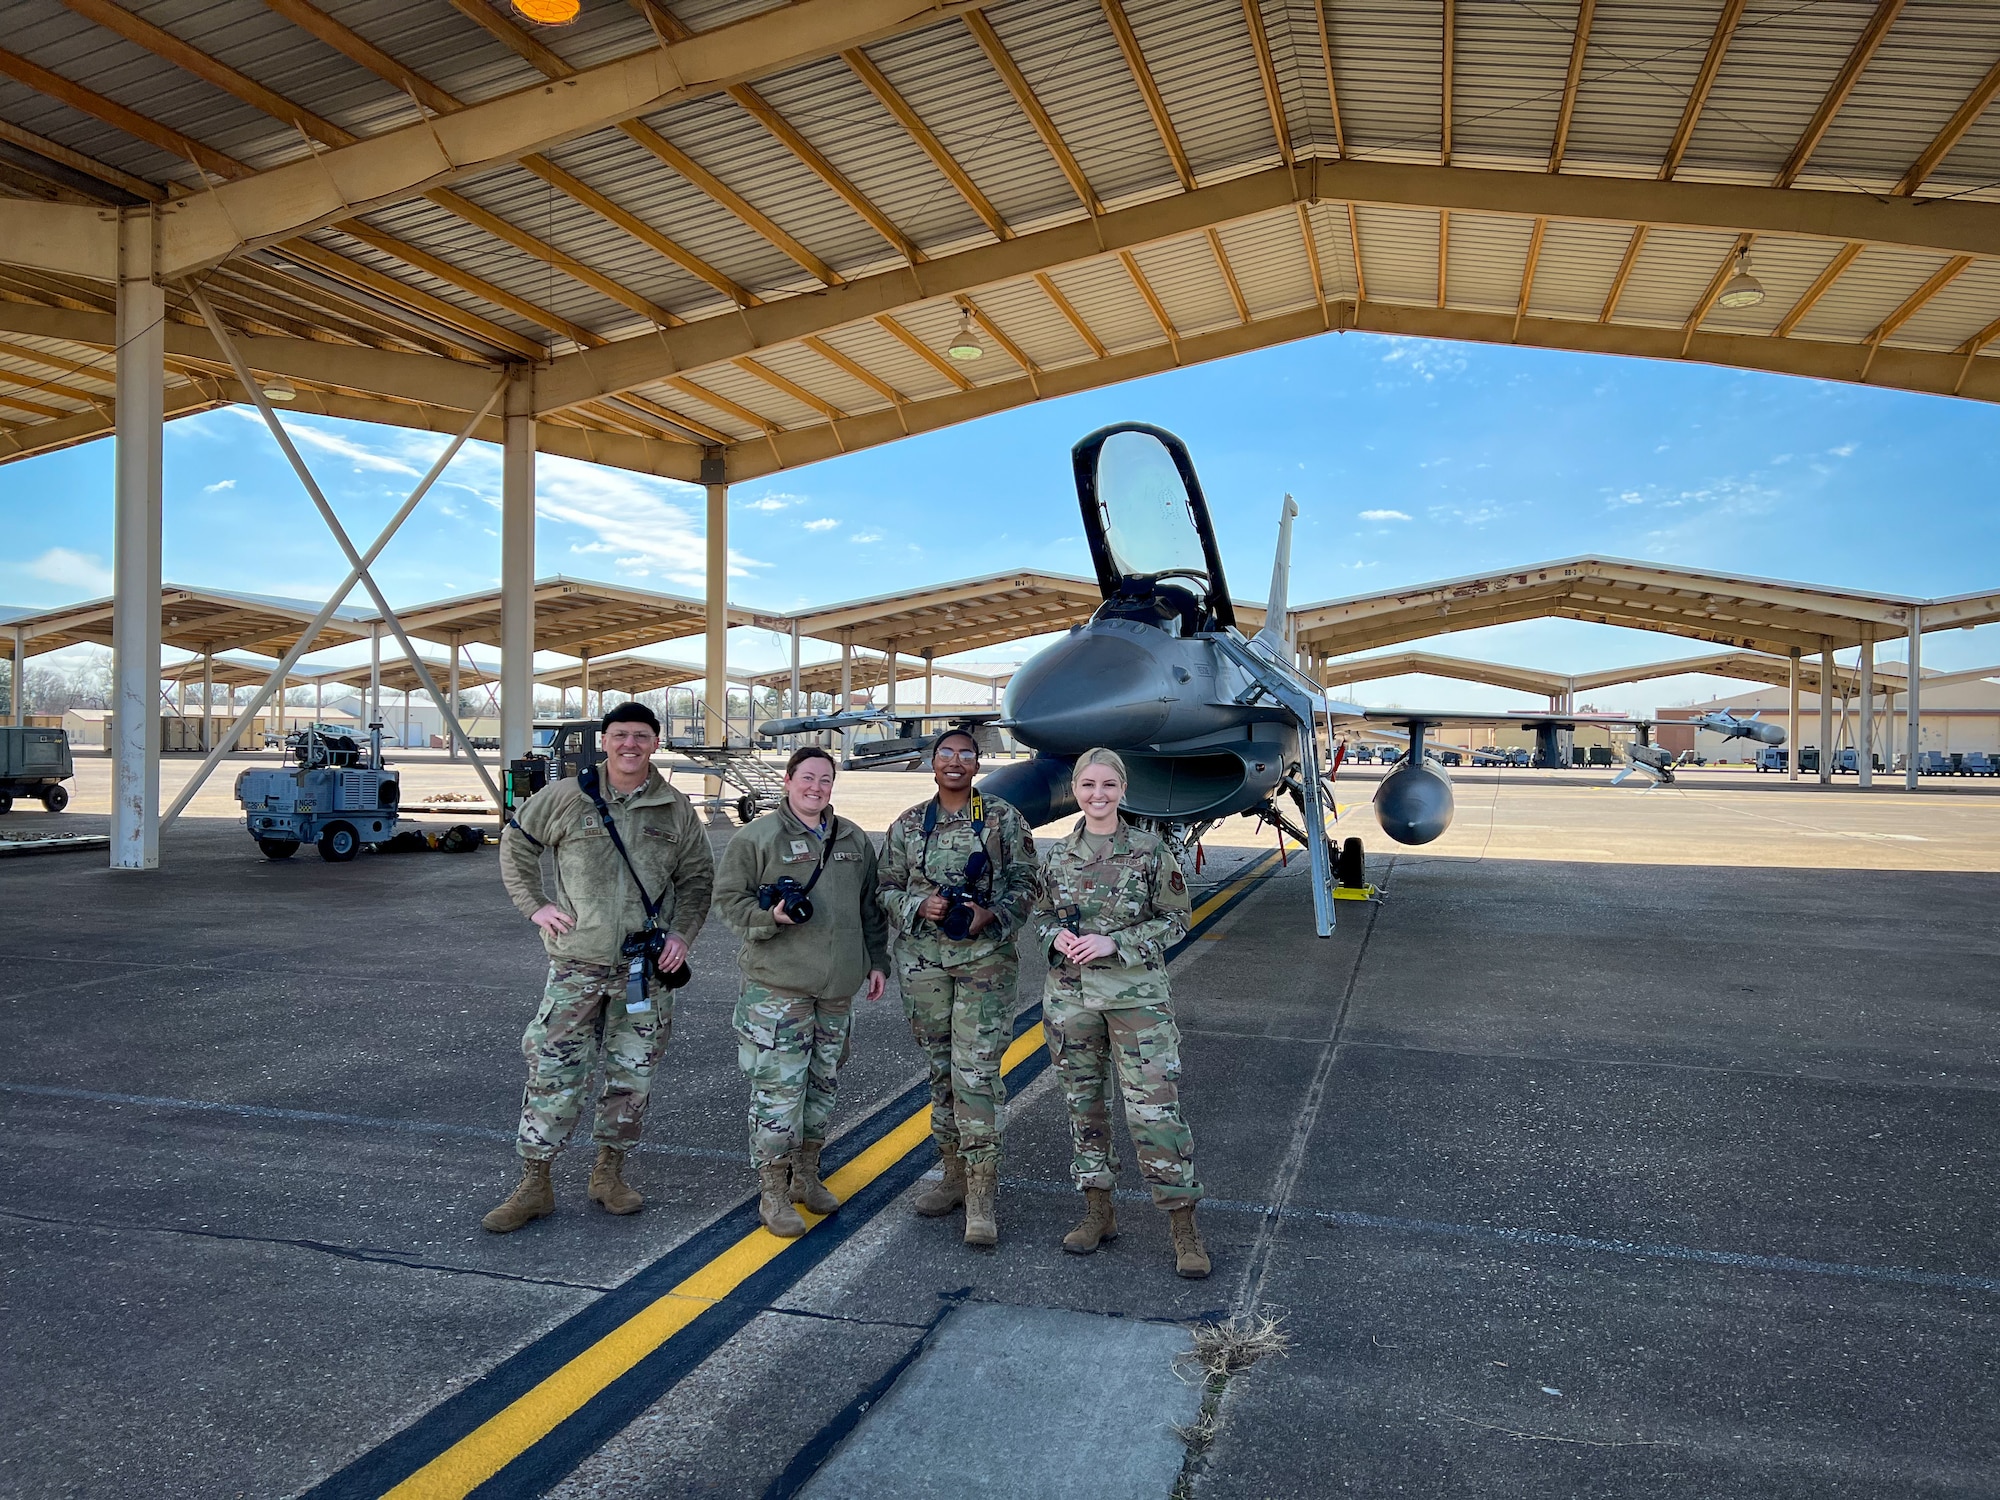 Members from the 301st Fighter Wing and 307th Bomb Wing pose in front of a F-16 Fighting Falcon at Barksdale Air Force Base, Louisiana on March 9, 2022. Public Affairs (PA) Specialists from the 301 FW and 307 BW conducted joint public affairs training to enhance readiness.